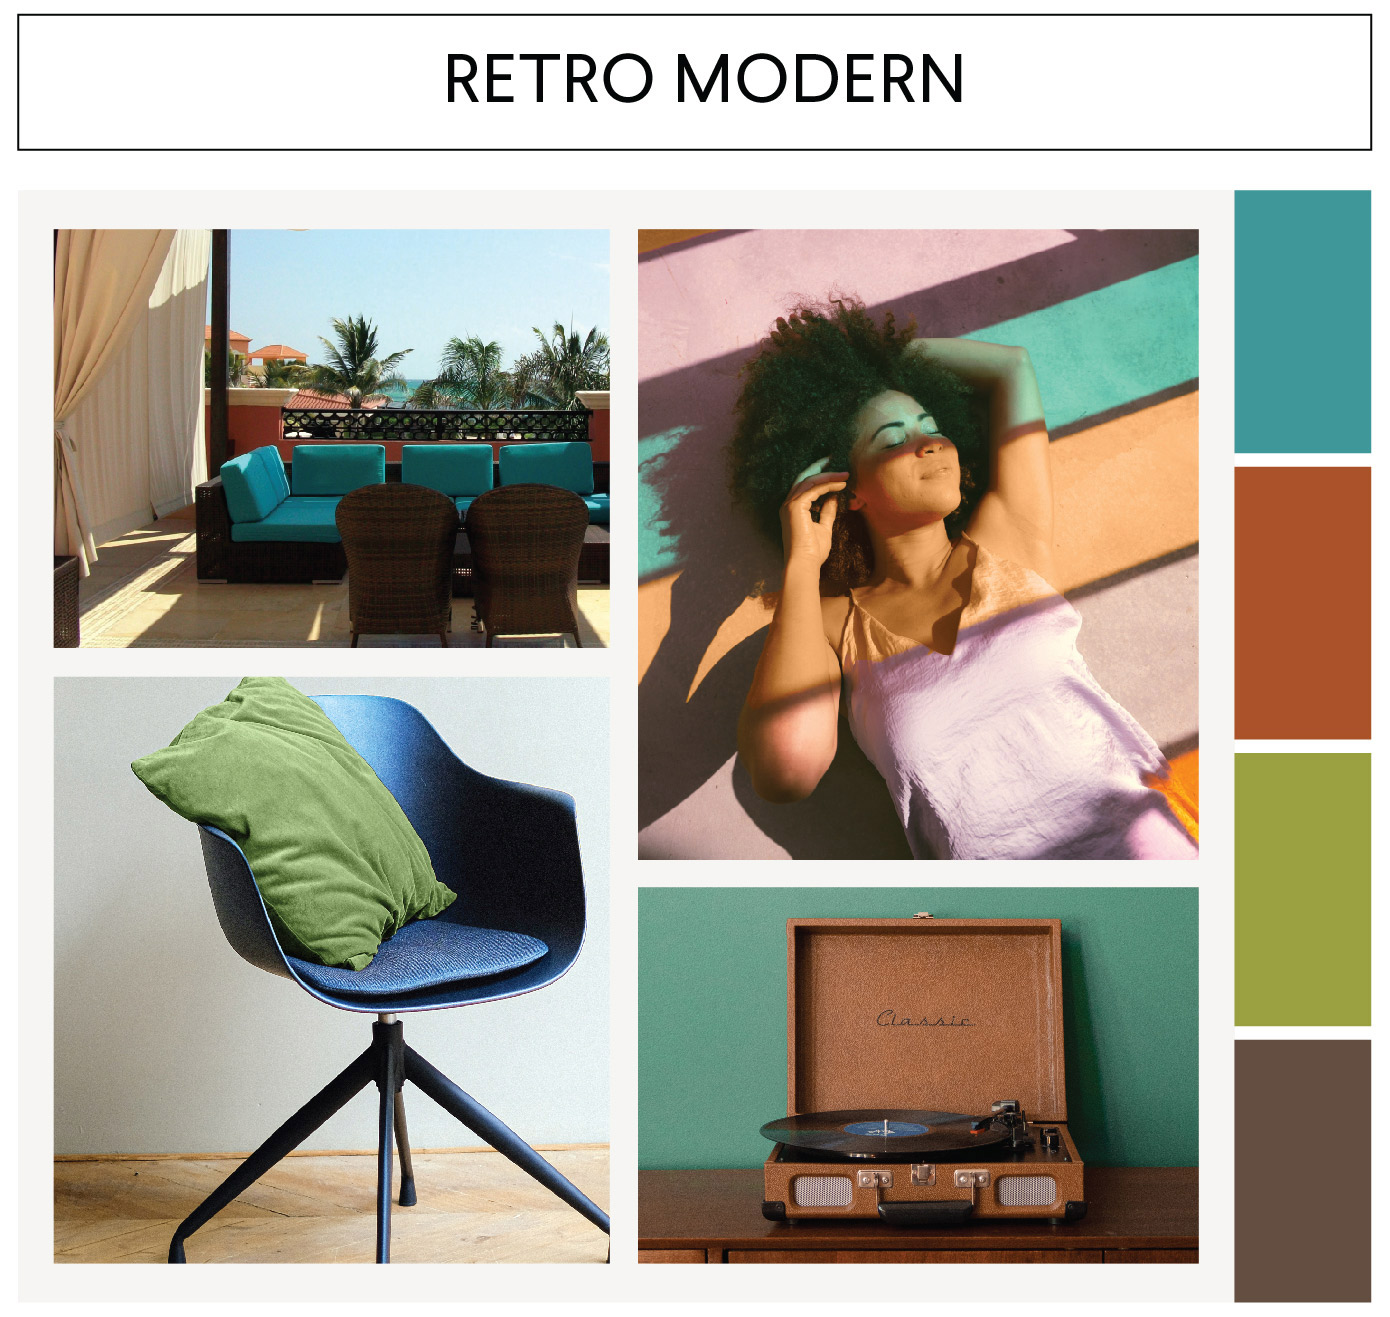 image of modern retro styles that links to modern retro page